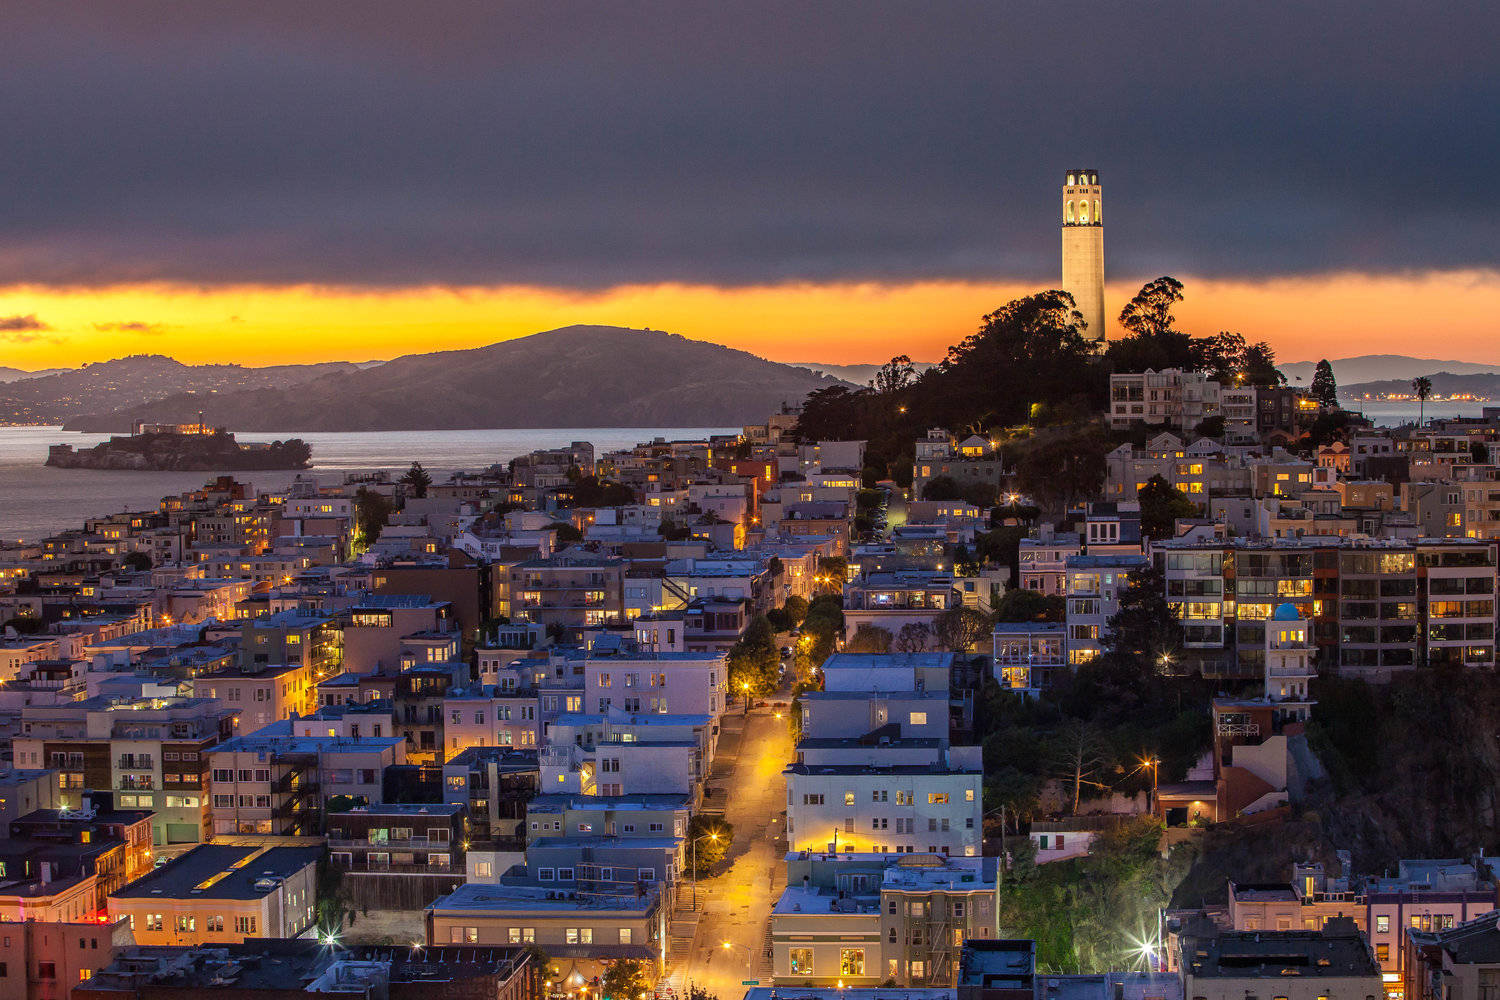 Enjoy the vibrant night sky and stunning views from Coit Tower! Wallpaper